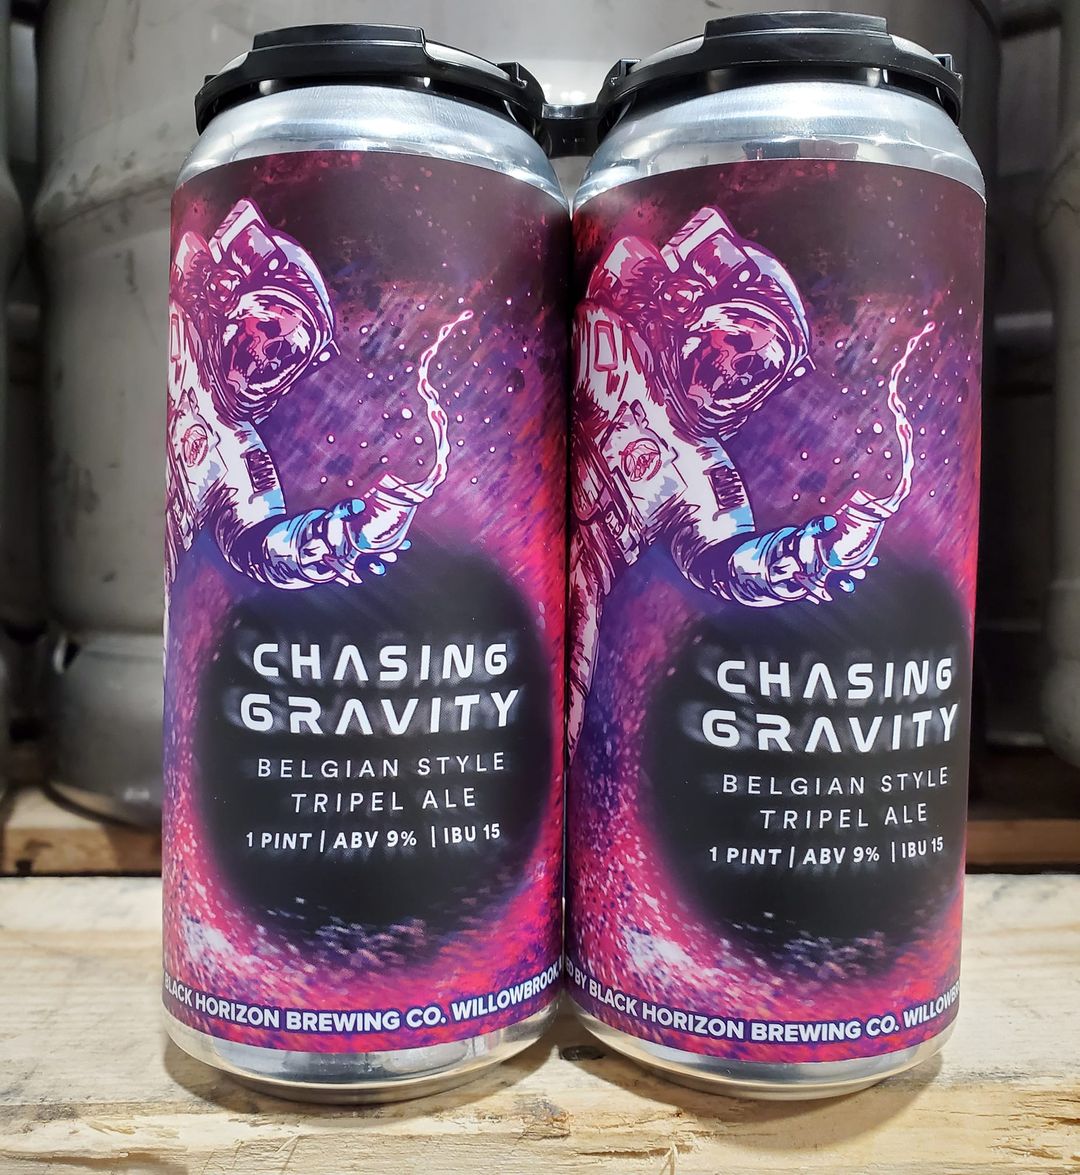 Glass of Chasing Gravity by Black Horizon Brewing Company